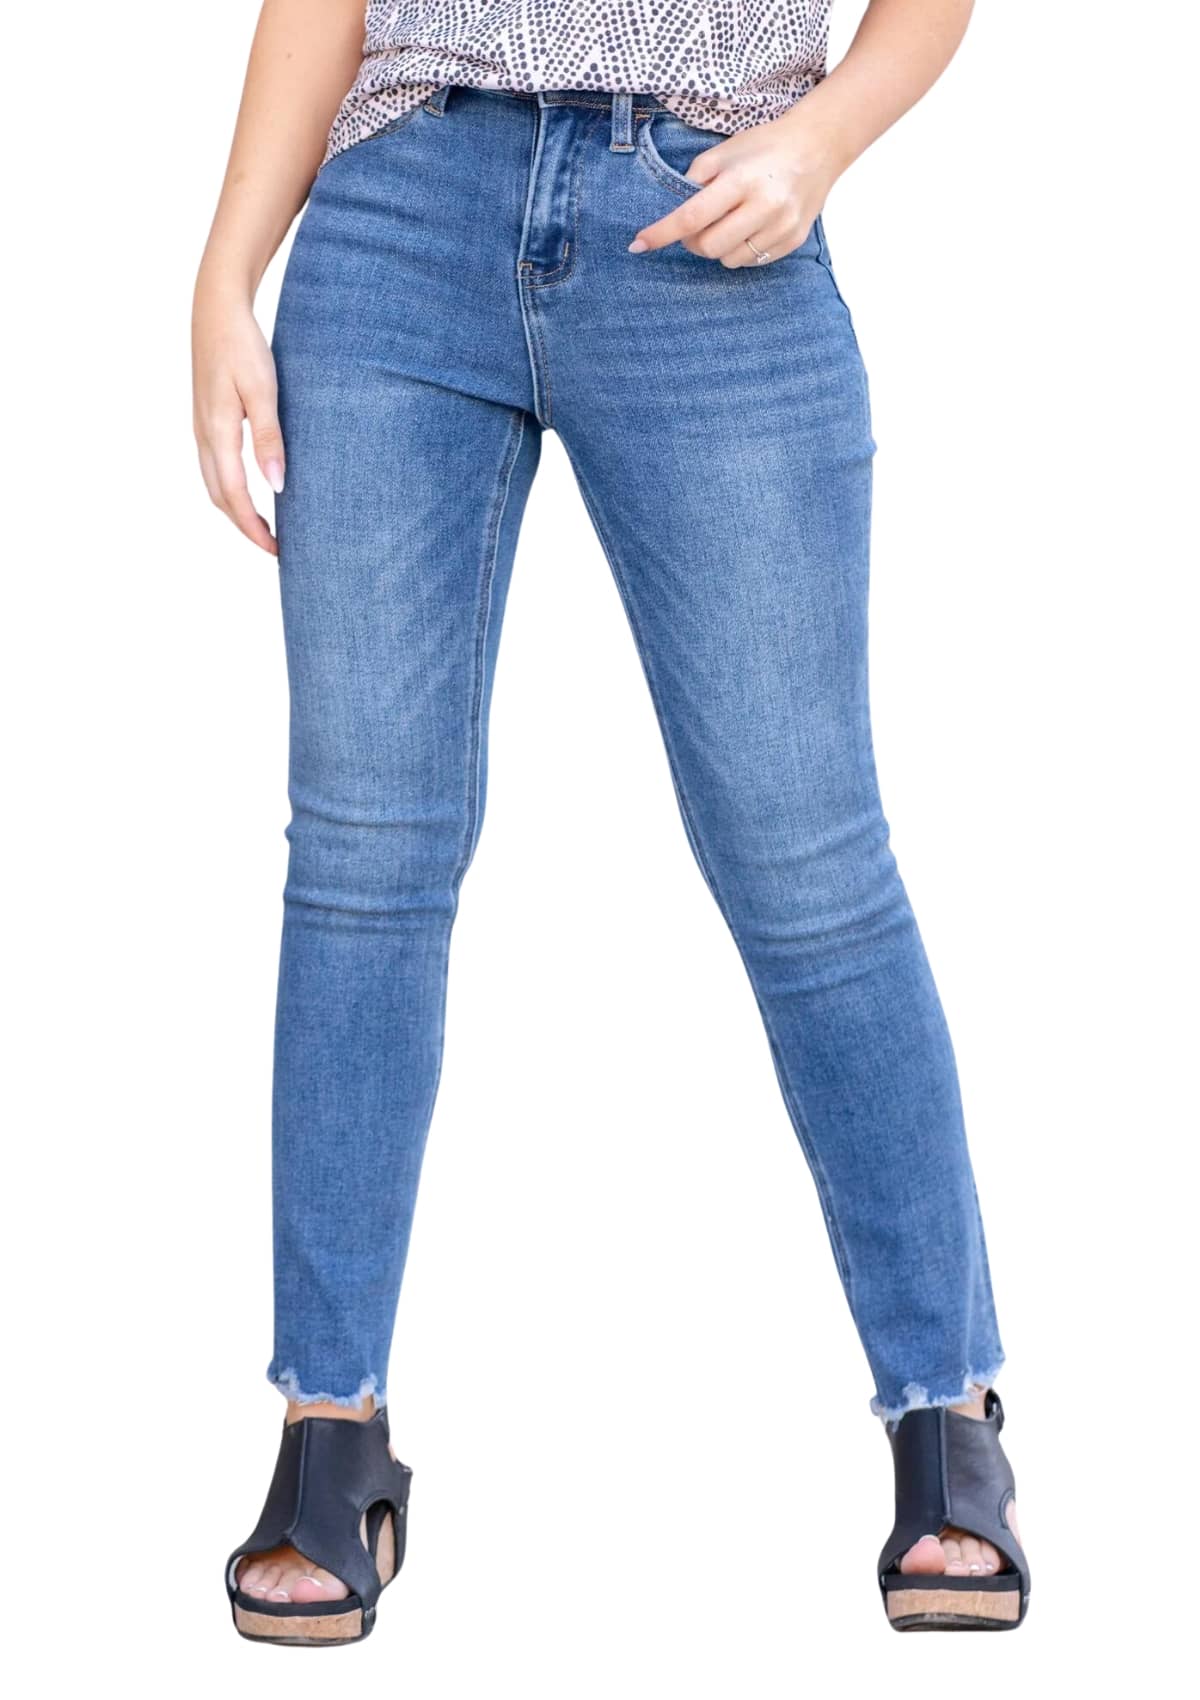 Straight leg blue jeans with frayed hems.